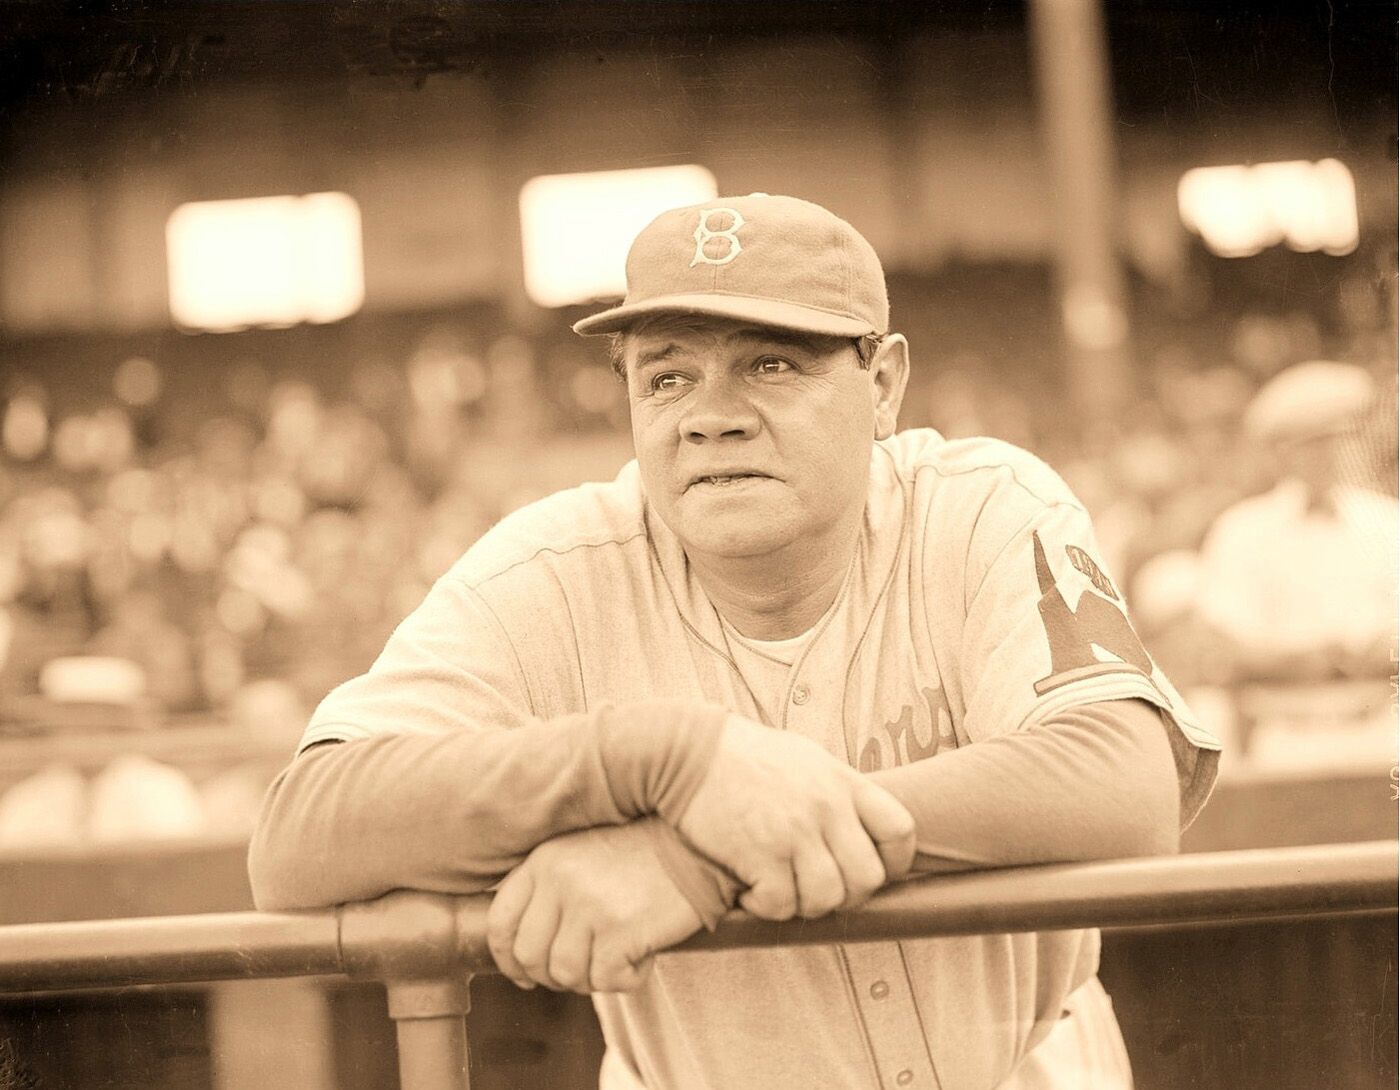 Babe Ruth, Brooklyn Dodgers Coach – Society for American Baseball Research